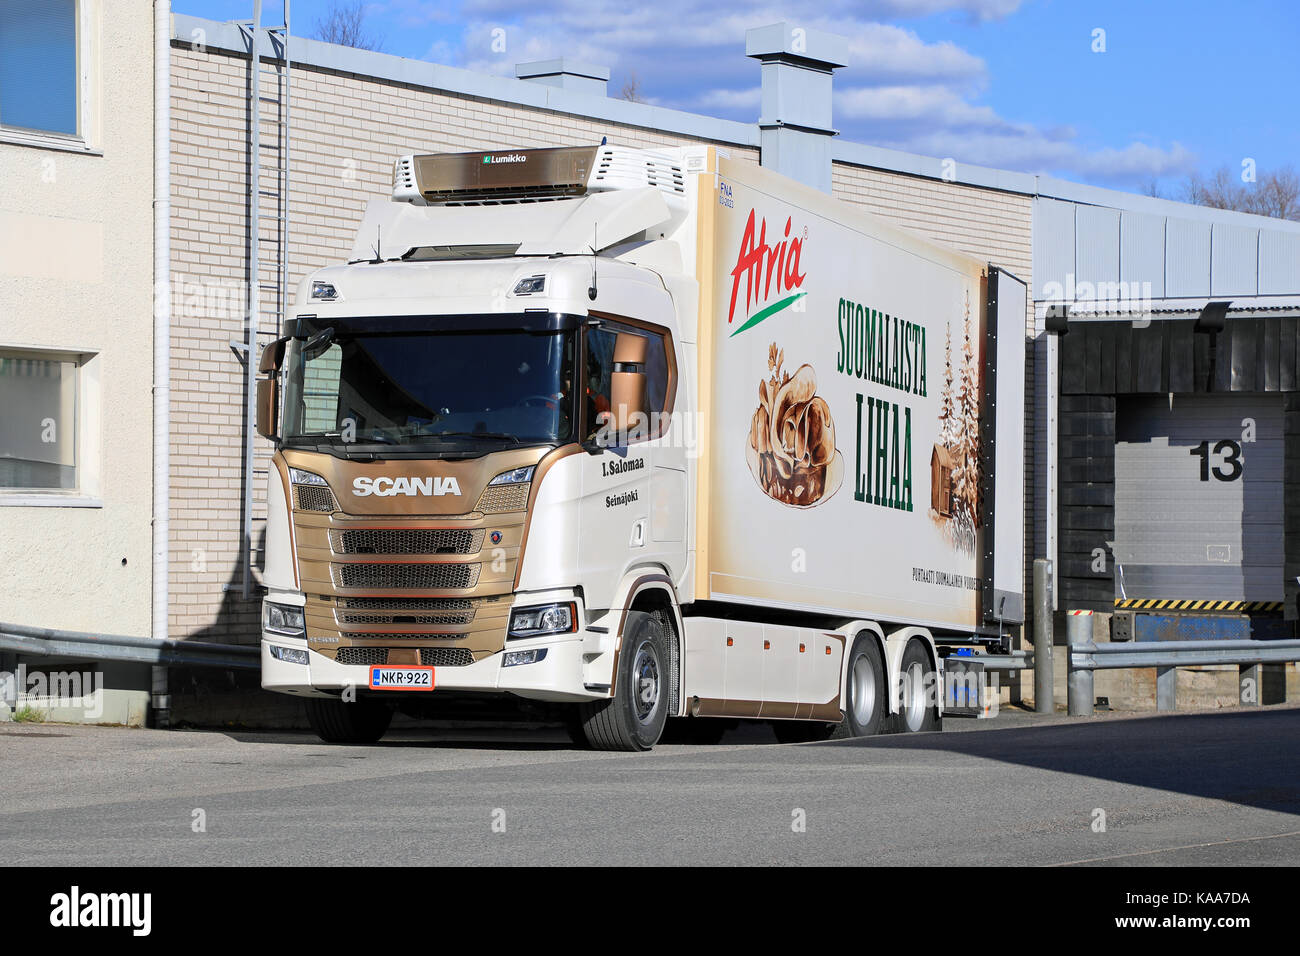 FORSSA, FINLAND - MAY 1, 2017: Stylish Next Generation Scania R500 of I Salomaa for transporting foodstuff at the loading zone of a warehouse. Stock Photo